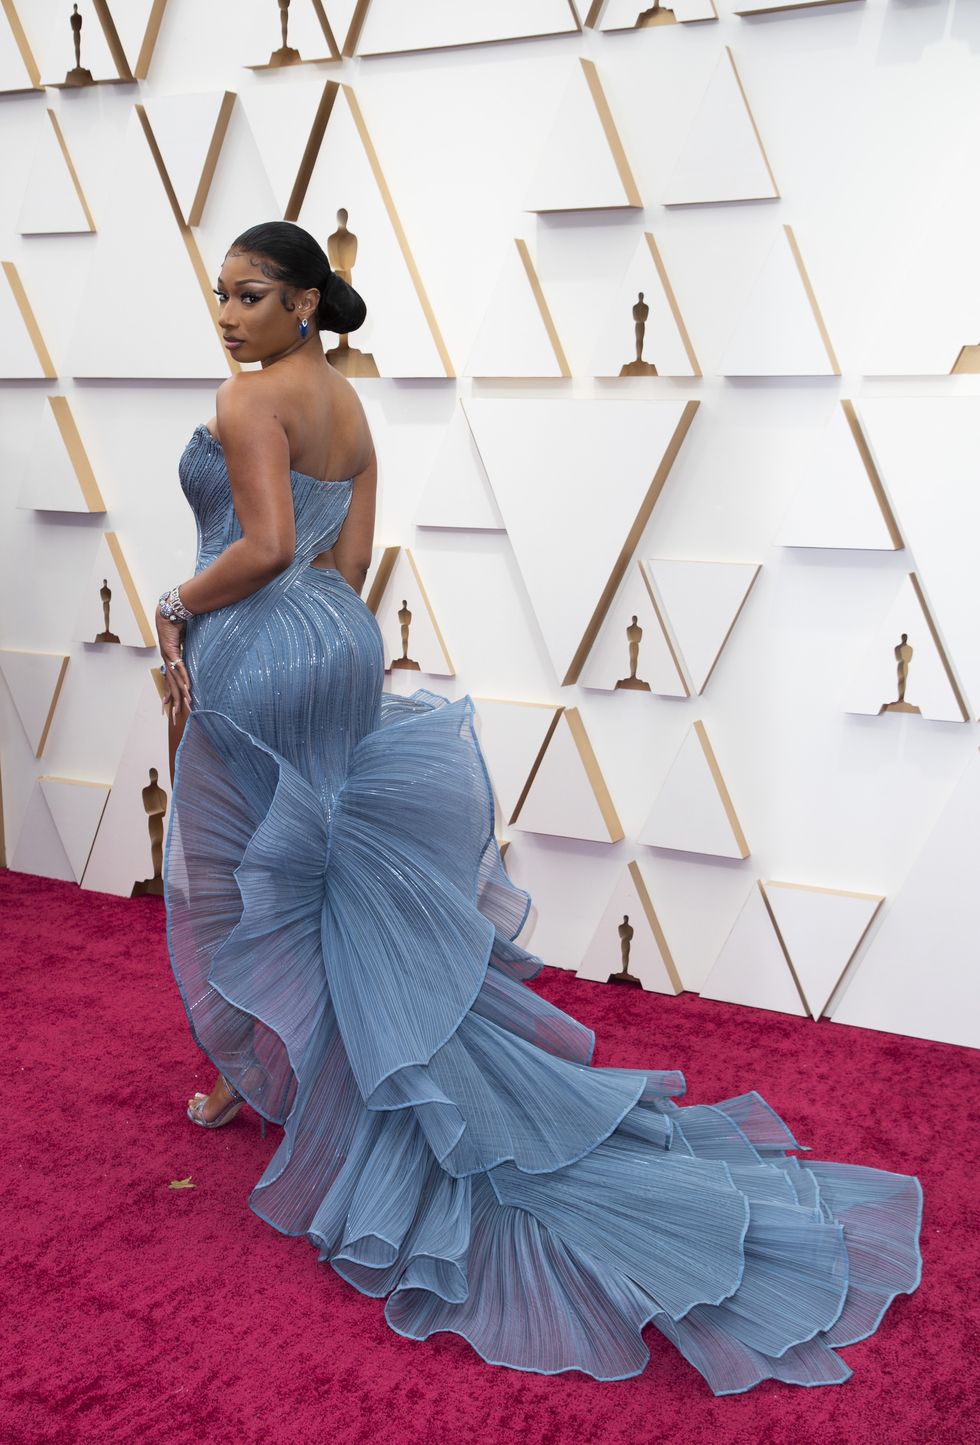 Megan the Stallion 2022 oscars ABCGETTY IMAGES Wearing a sculptural and intricate strapless gown.